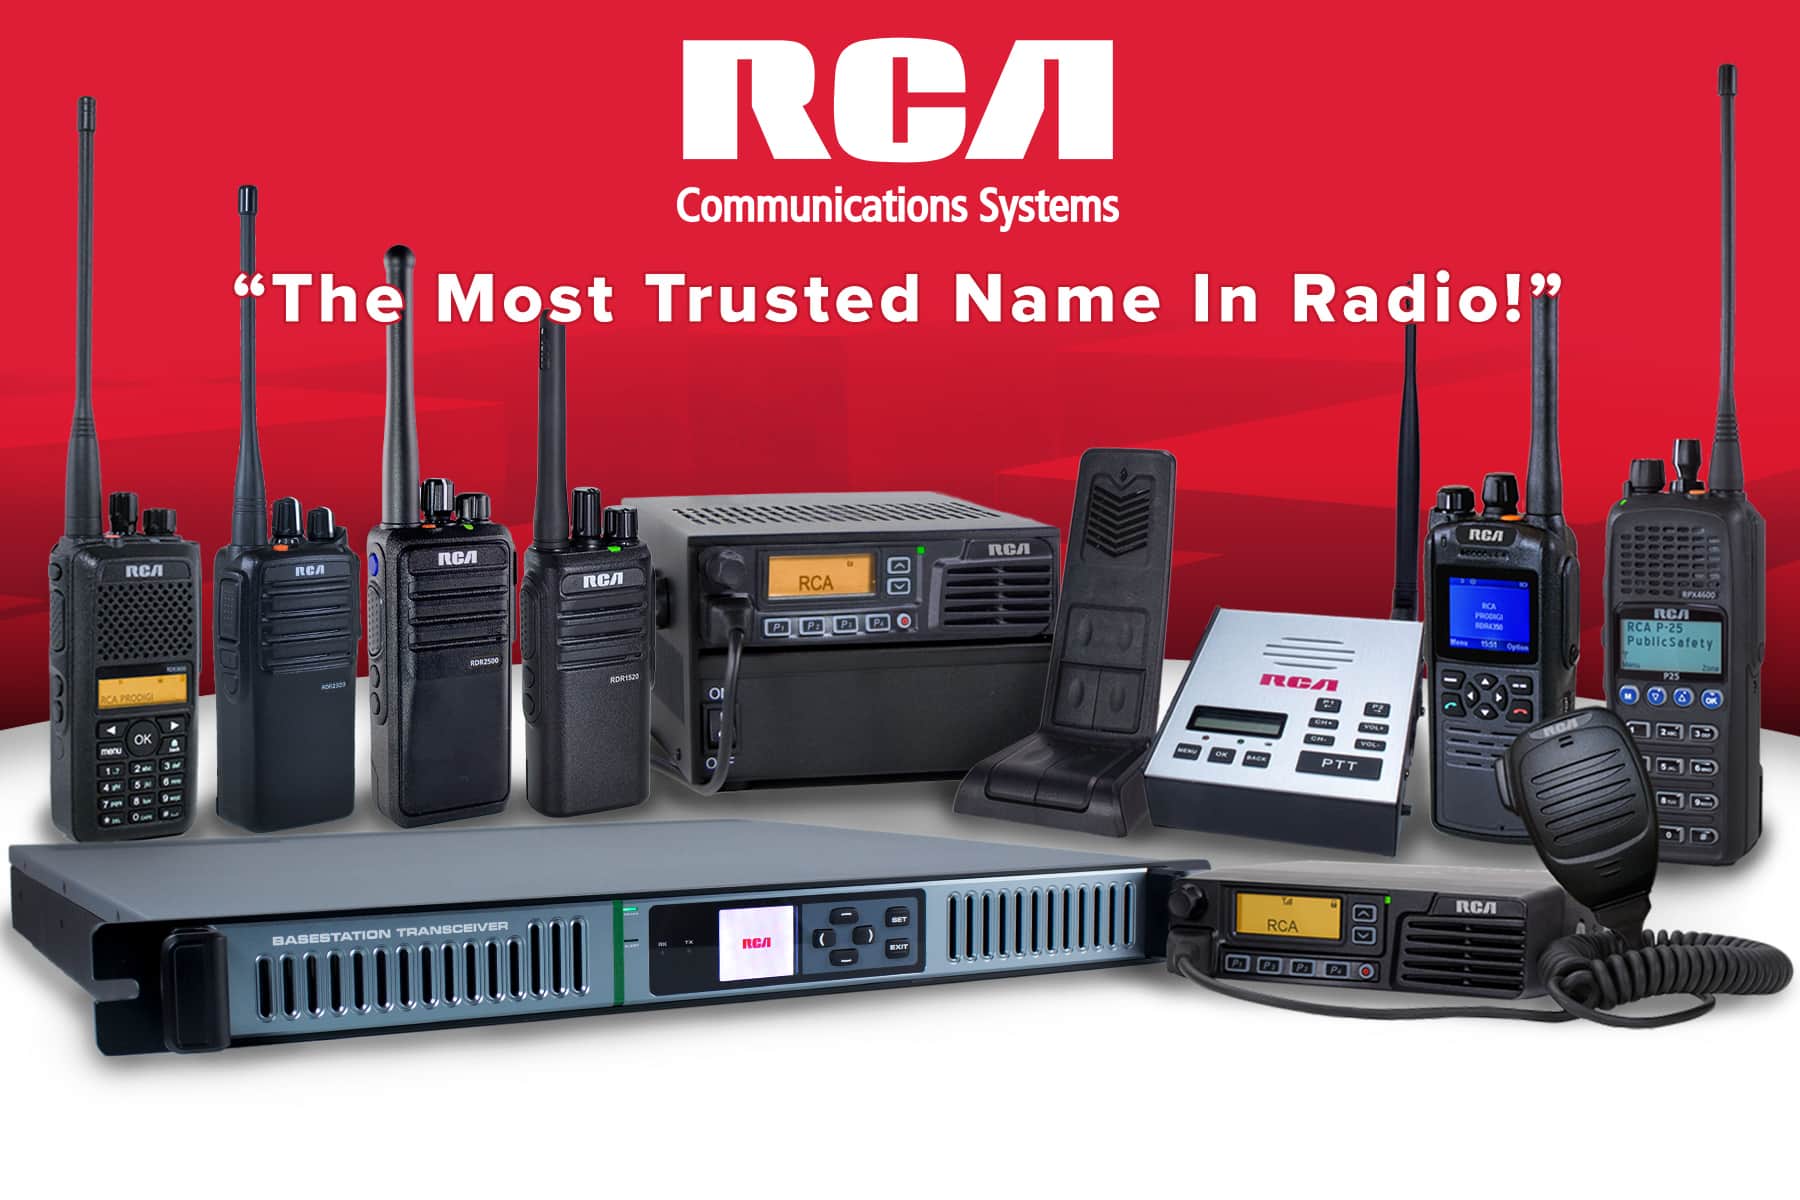 A collection of RCA two-way radios, including six handheld models, two base stations, one mic extension, one repeater, and one mobile radio. A tagline reads, "The Most Trusted Name in Radio!"